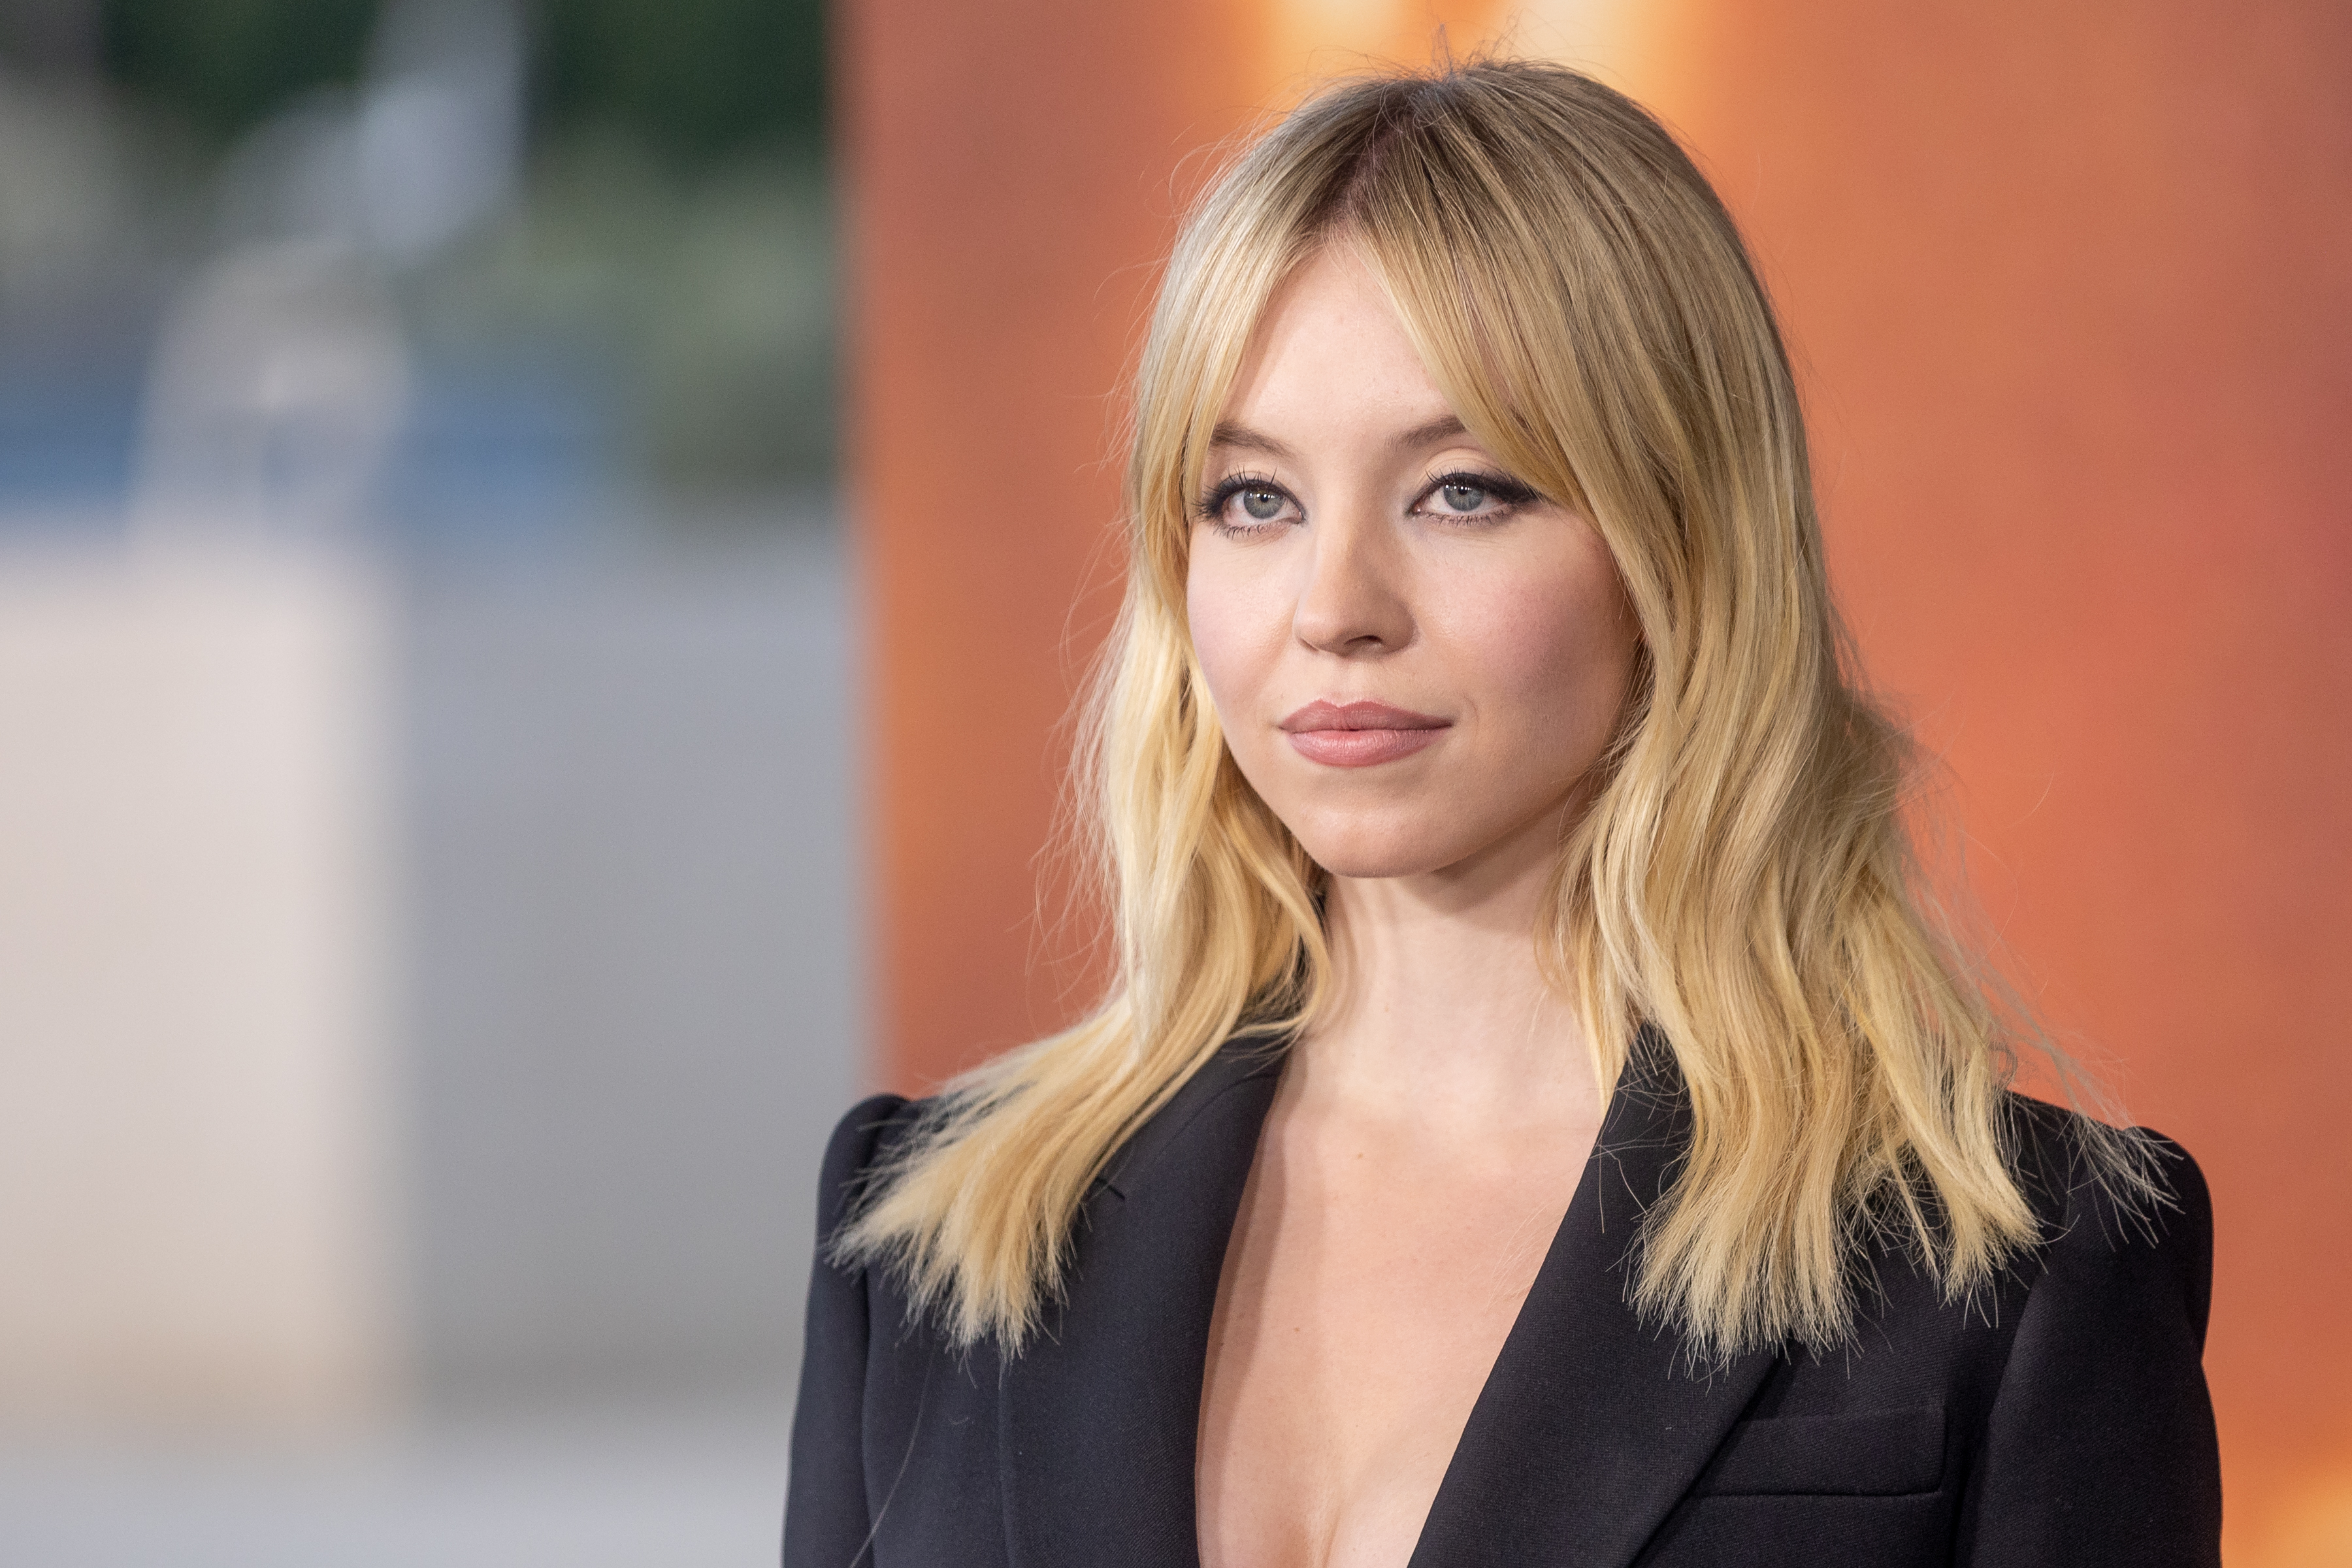 Sydney Sweeney attends the HBO Max FYC event for 'Euphoria' at Academy Museum of Motion Pictures on April 20, 2022 in Los Angeles, California | Source: Getty Images